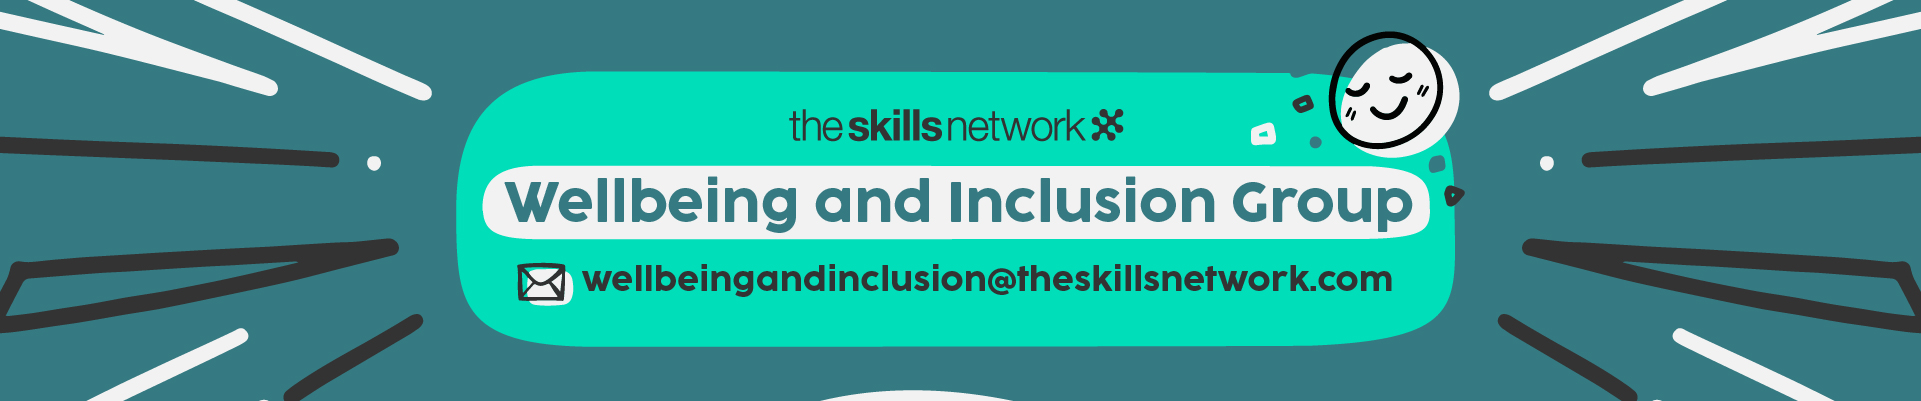 The Skills Network Wellbeing & Inclusion Group email footer